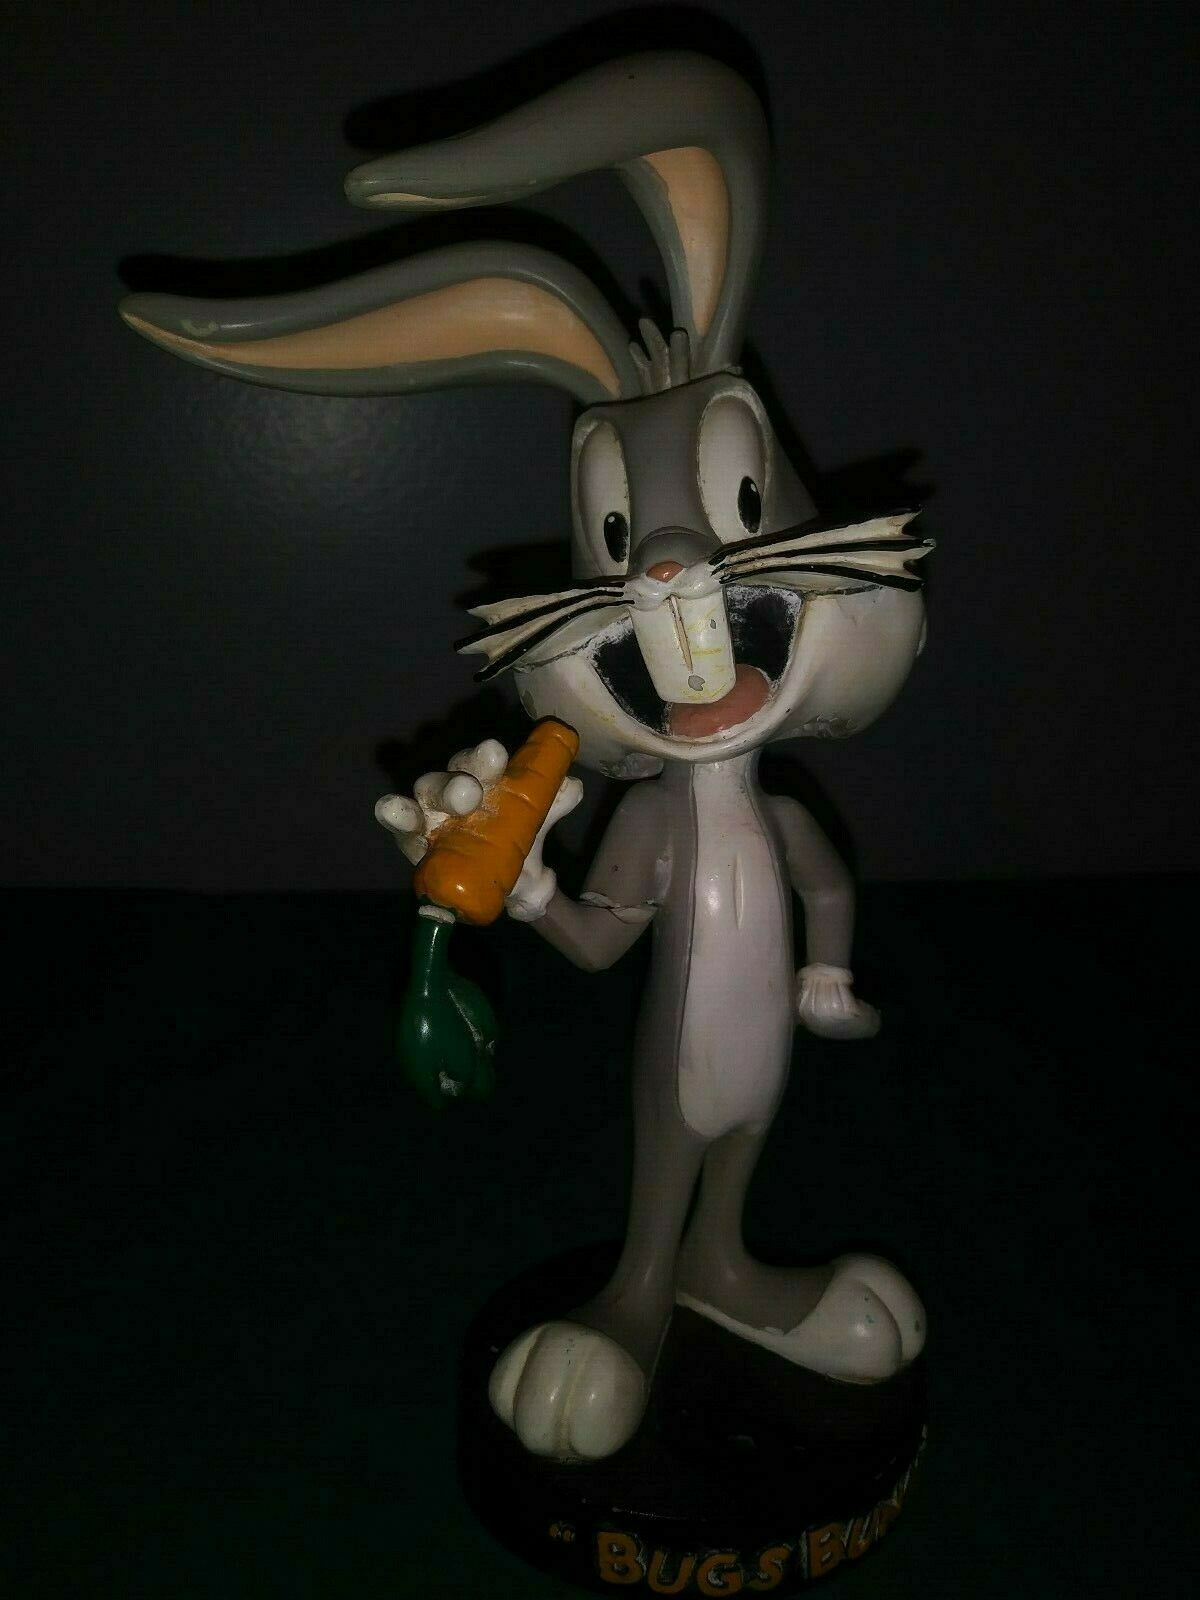 Bugs Bunny Bobblehead - 8" Tall - Good Condition But Ear Is Cracked - See Pics